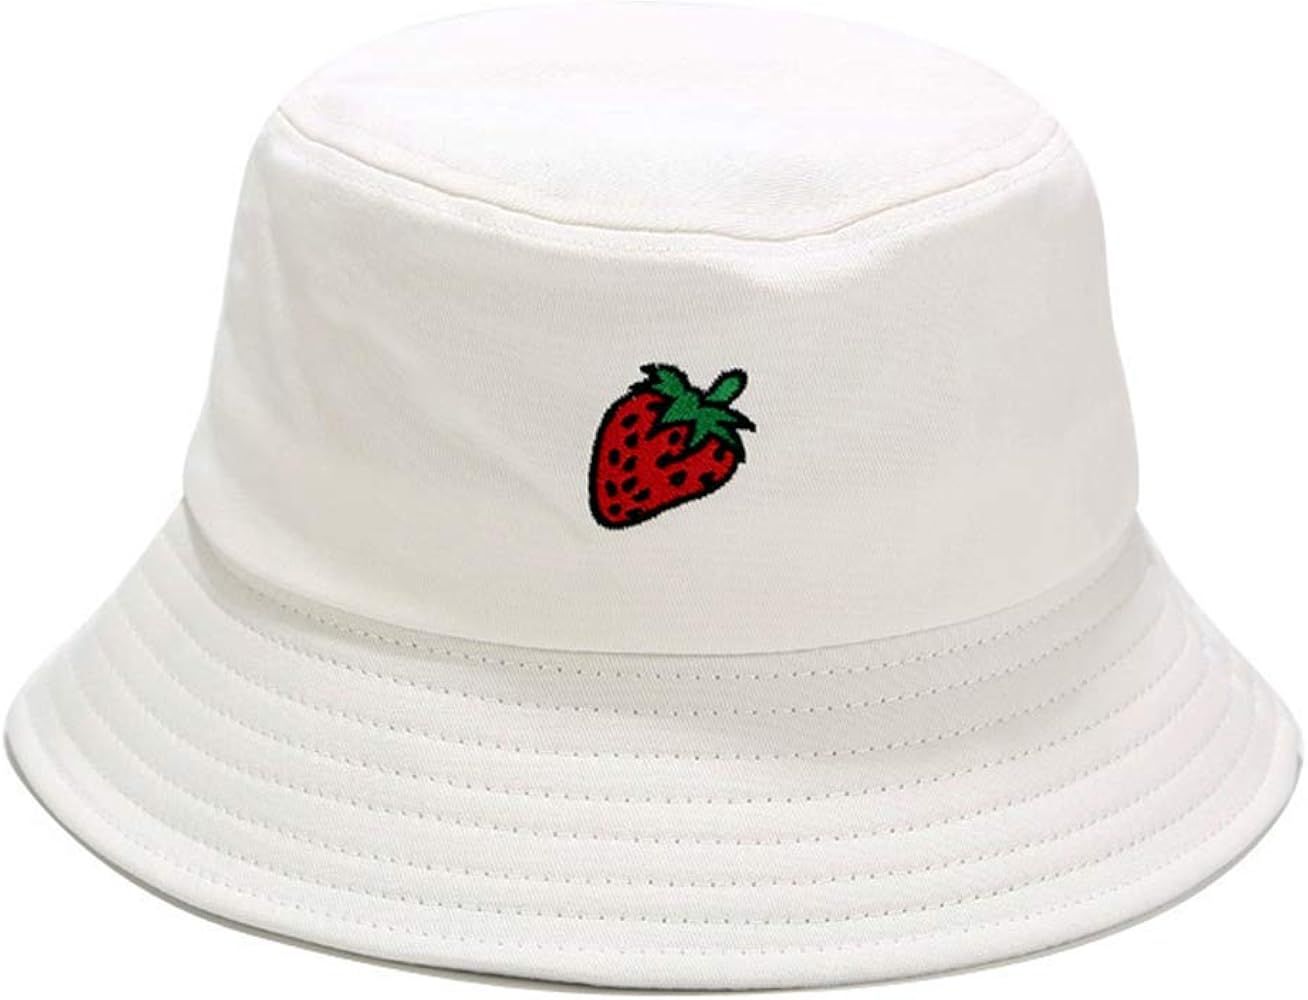 Funny Embroidered Bucket Hat Cute Pattern Fisherman Cap Packable Sun Hats for Women, Men | Amazon (US)